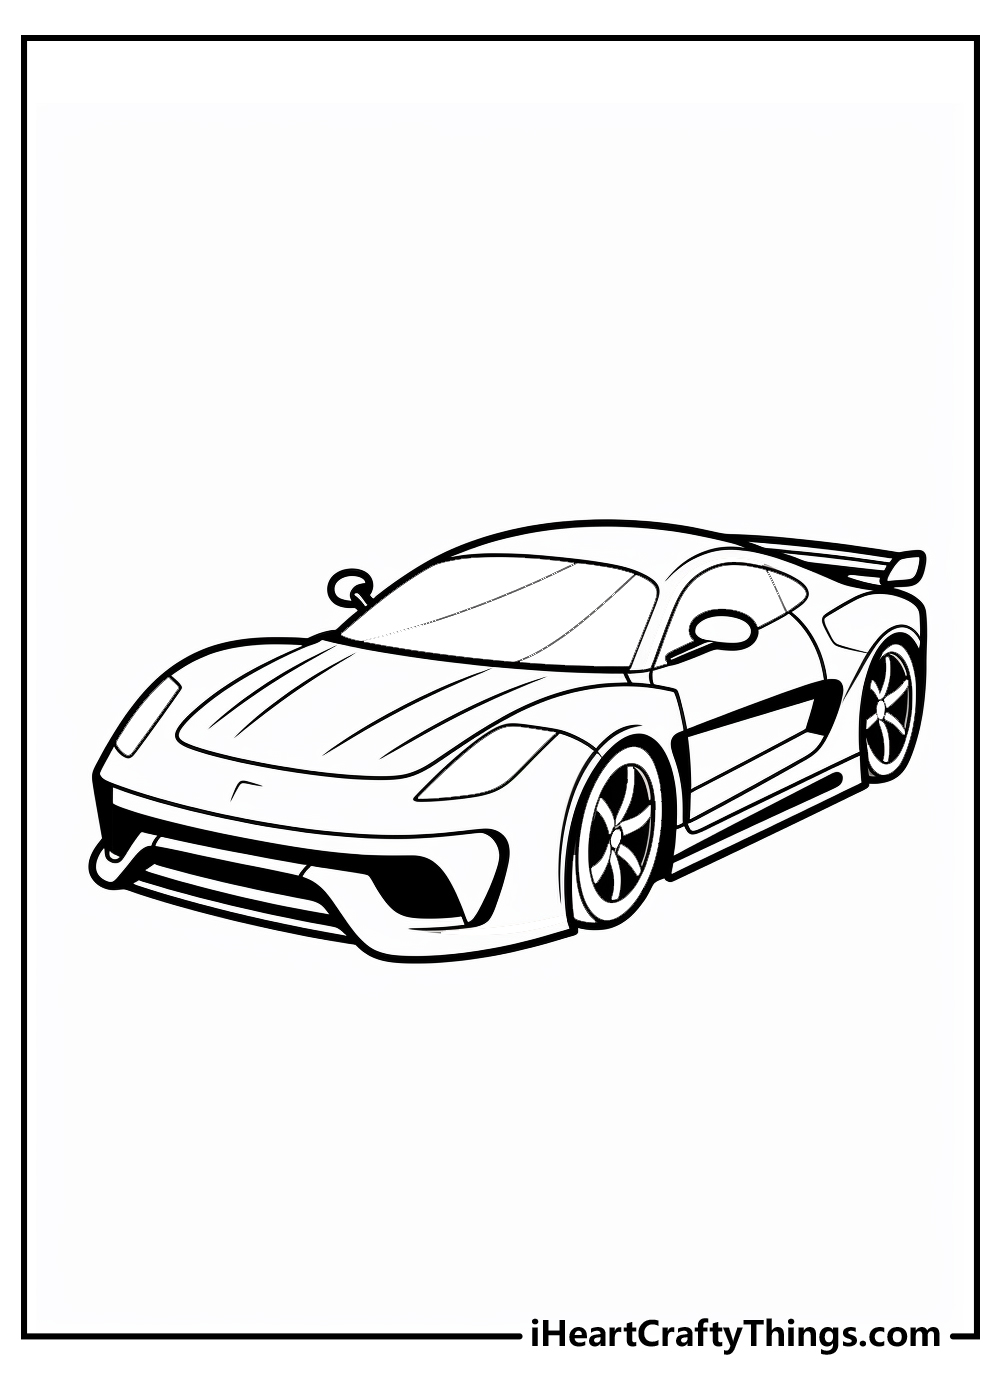 black-and-white race car coloring pages